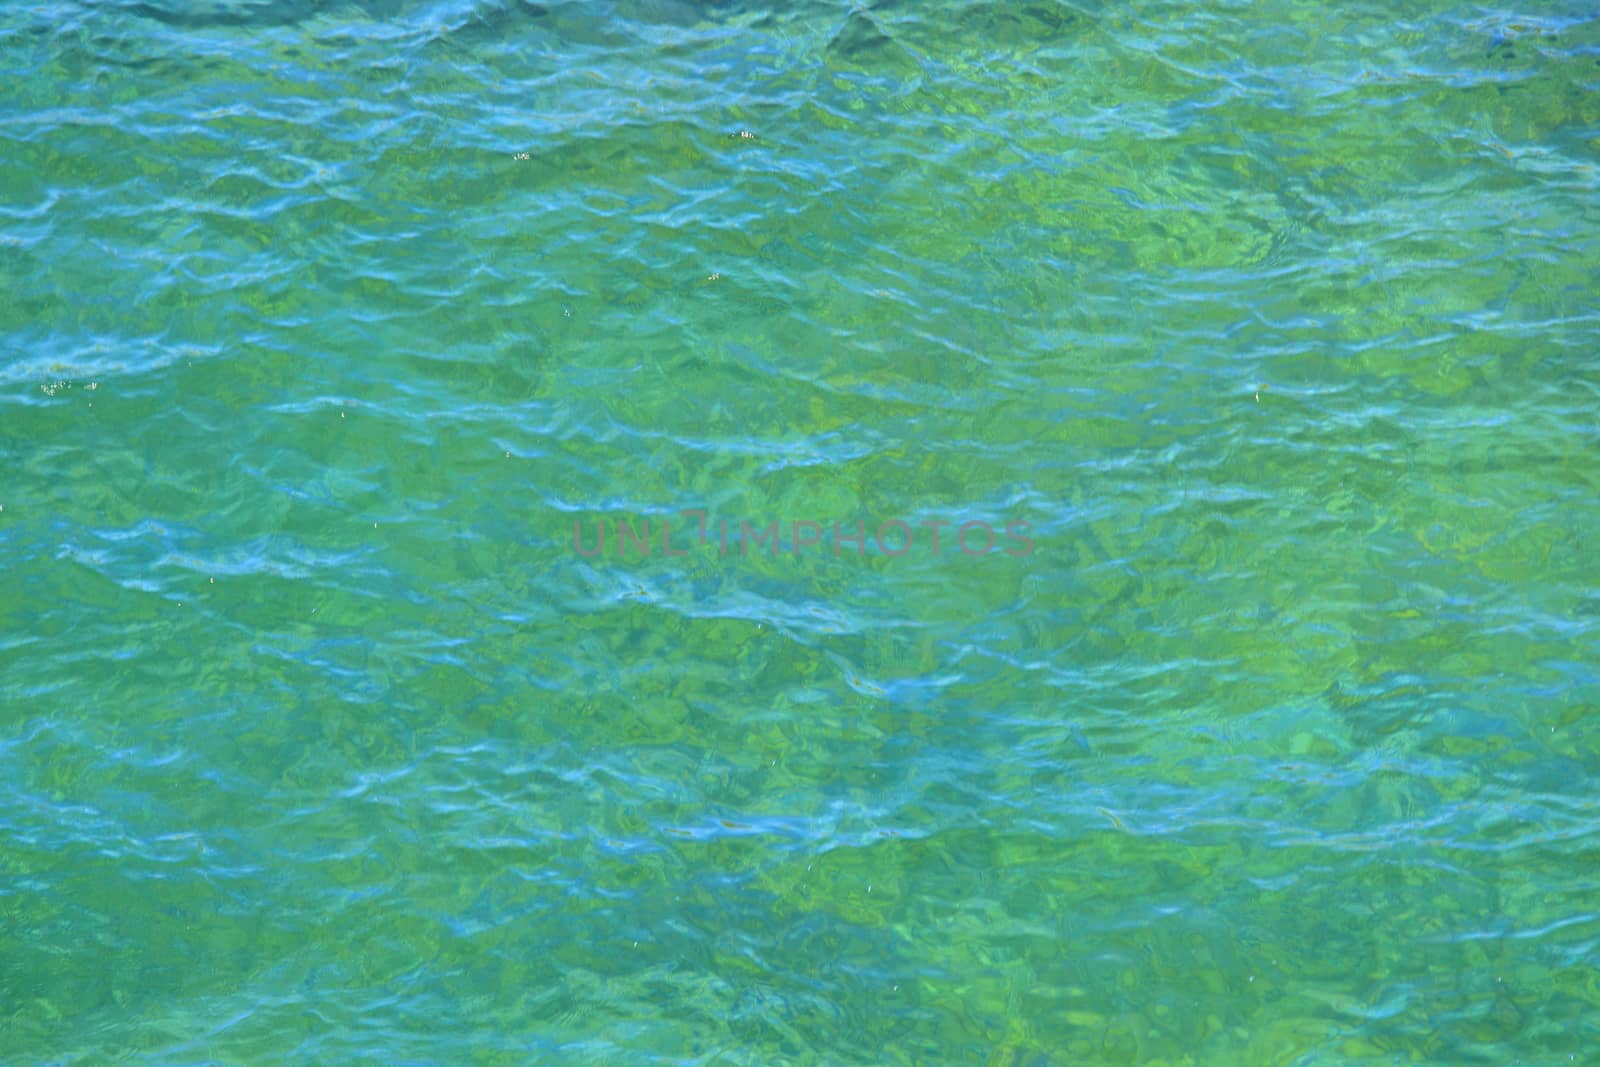 Water surface with small waves  by kalnenko